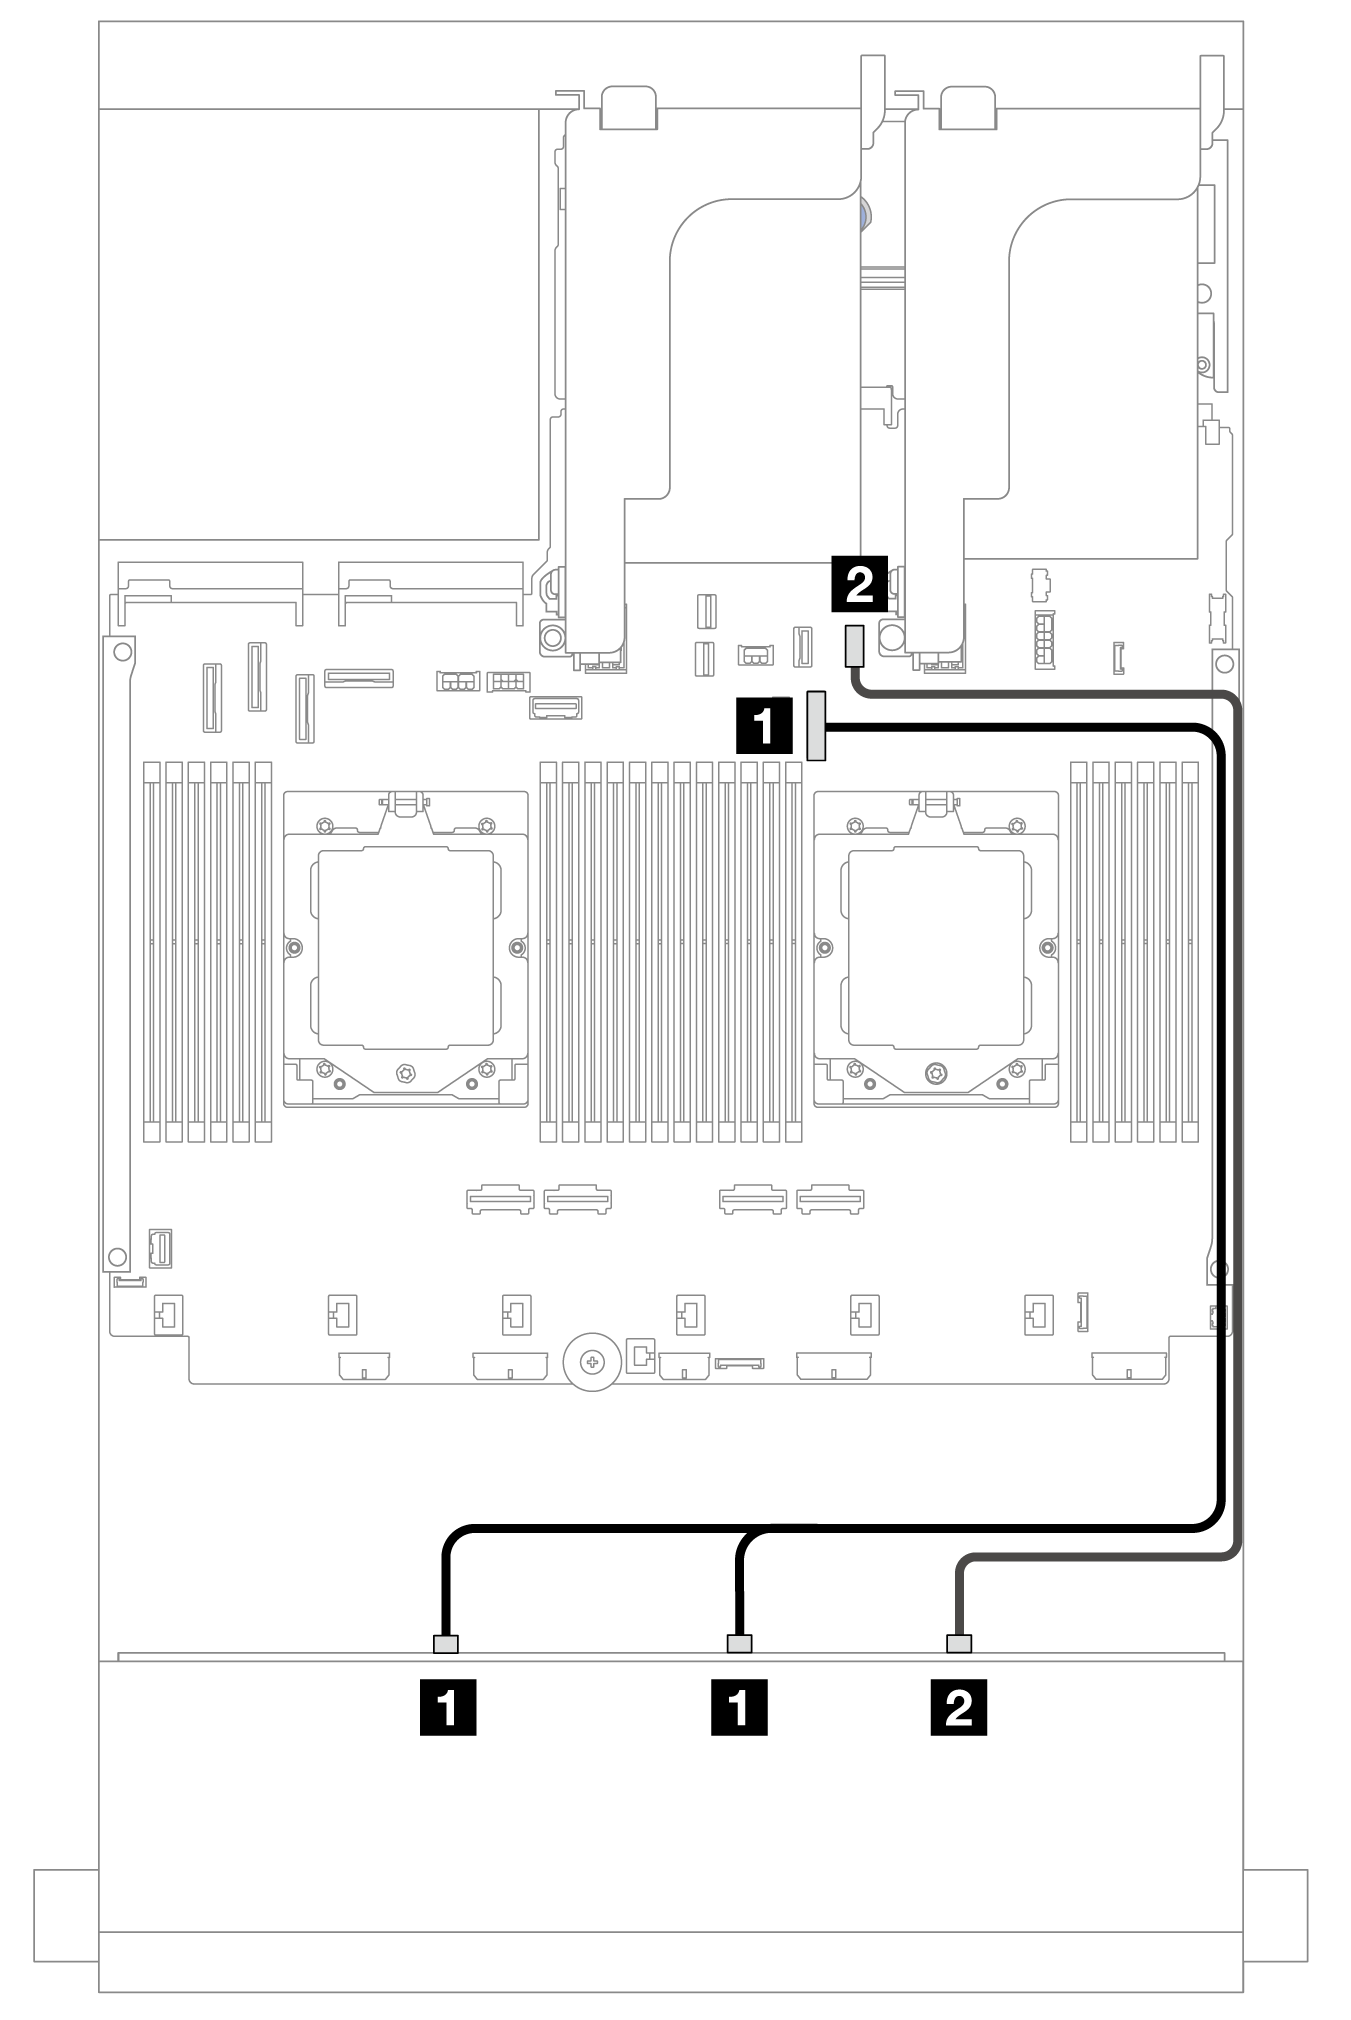 Front backplane cable routing when one processor installed